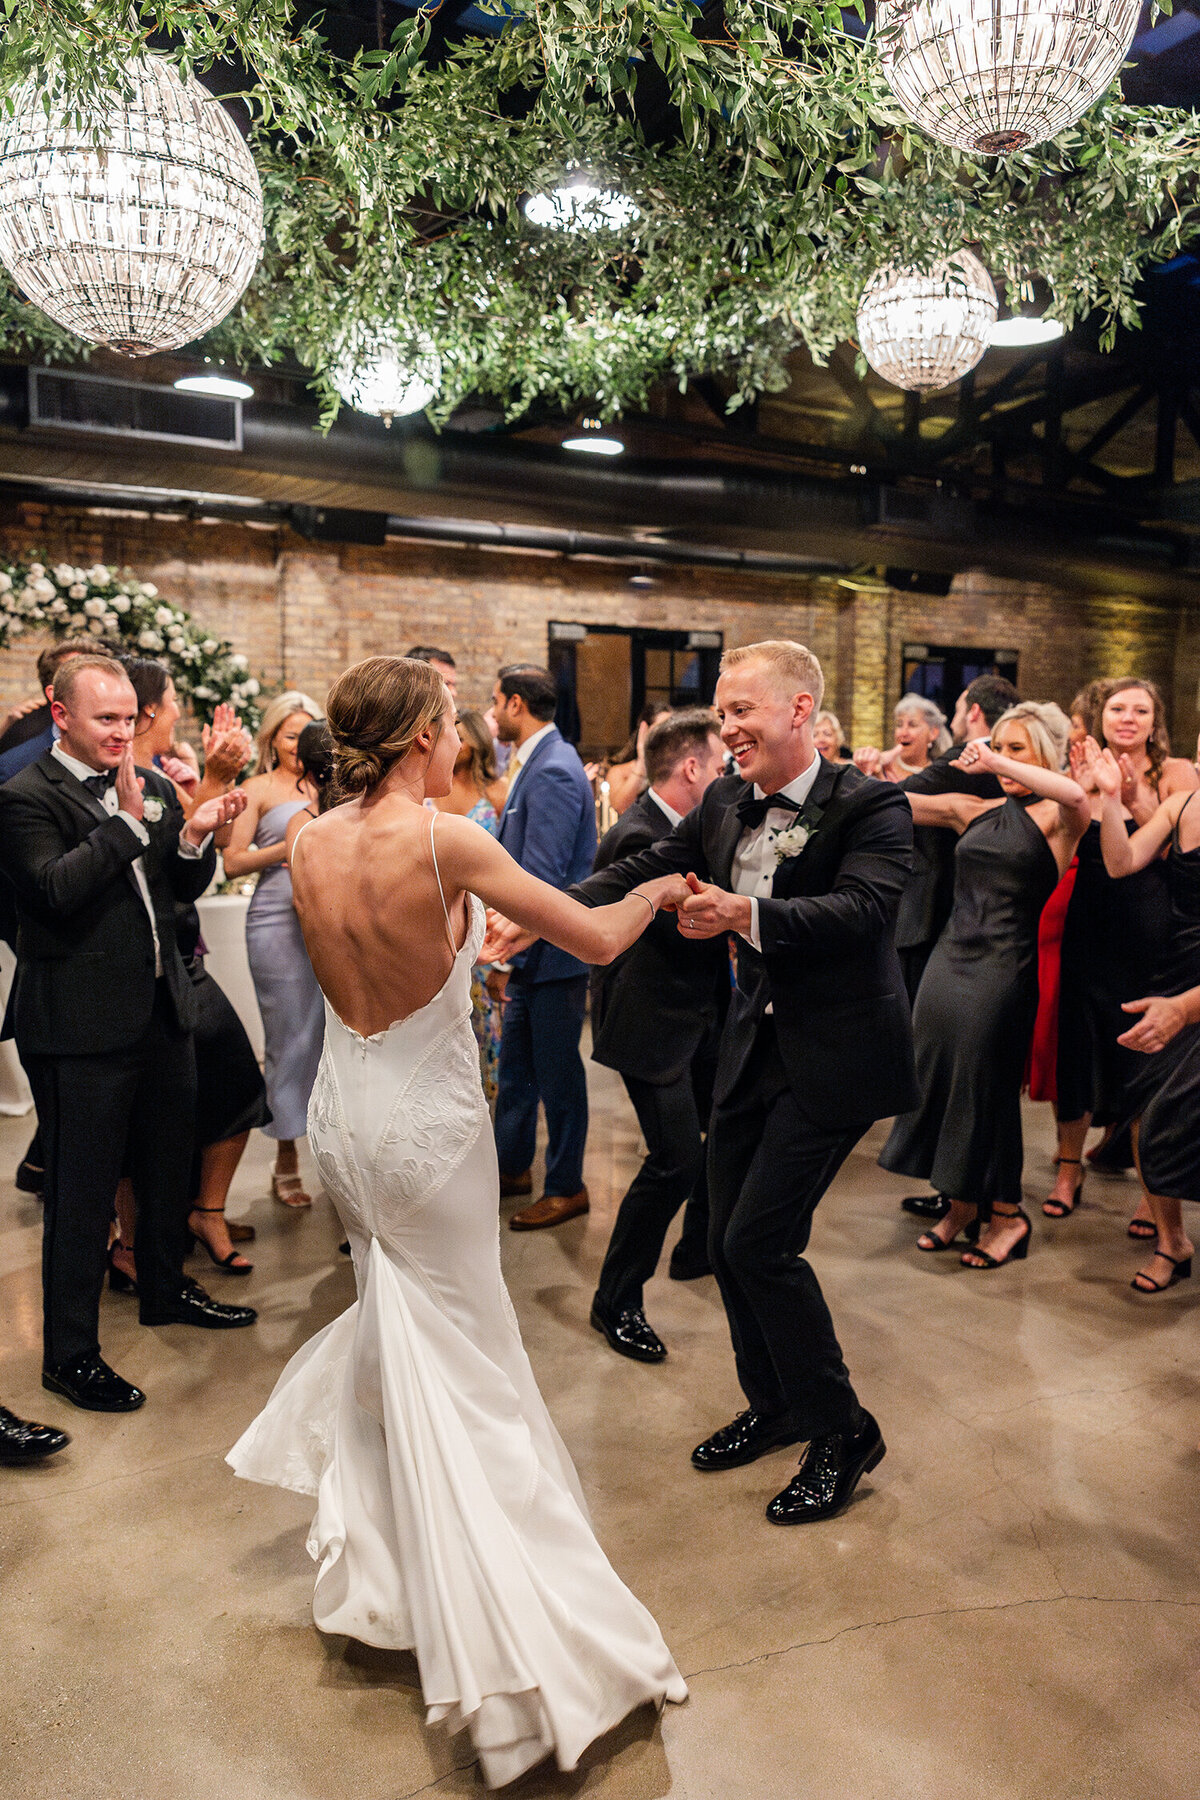 bride and groom dancing at wedding reception in Chicago, Illinois